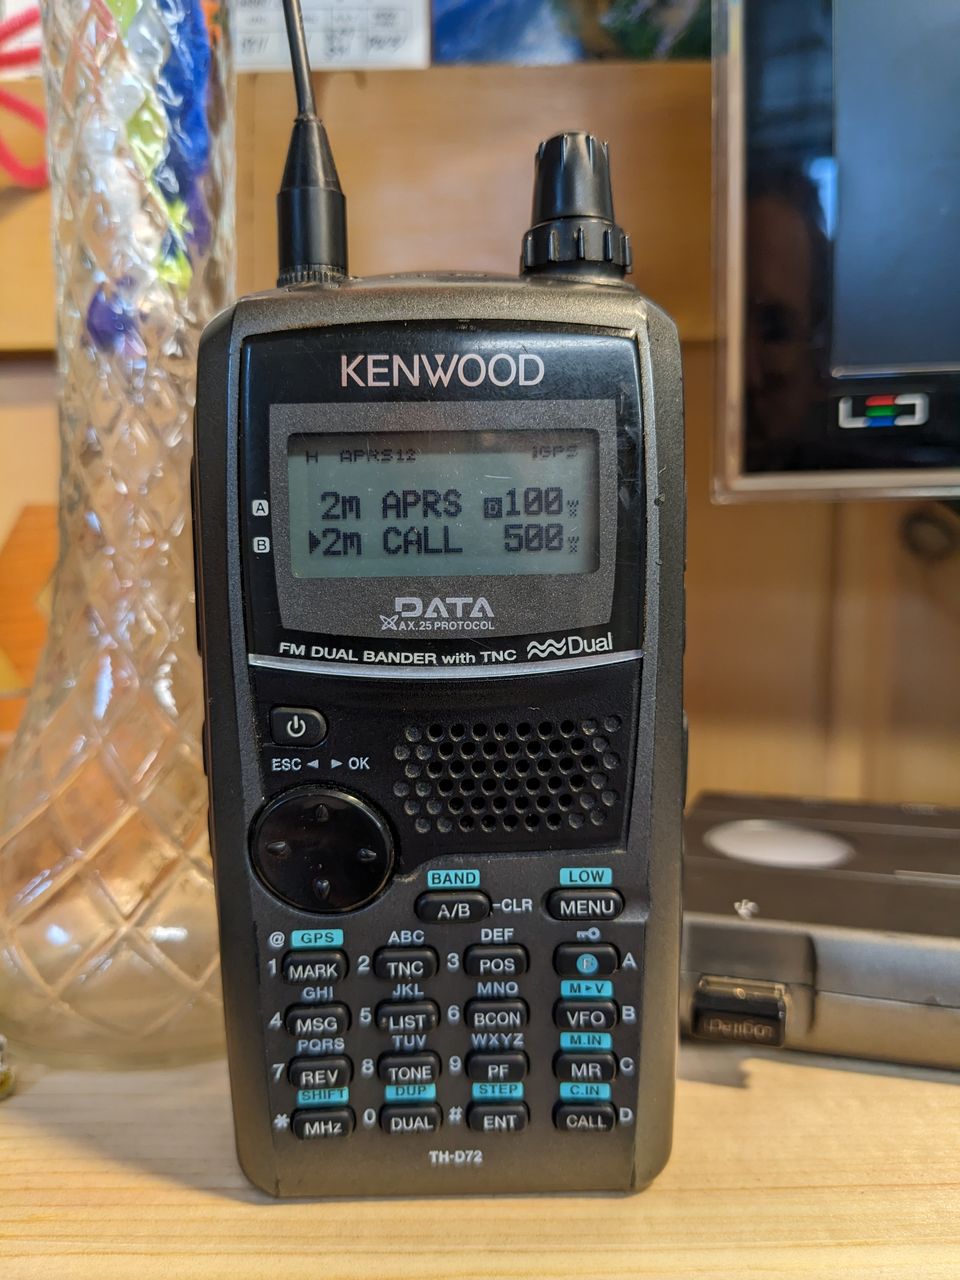 radio sitting on a desk tuned to 2m APRS and 2m CALL memories